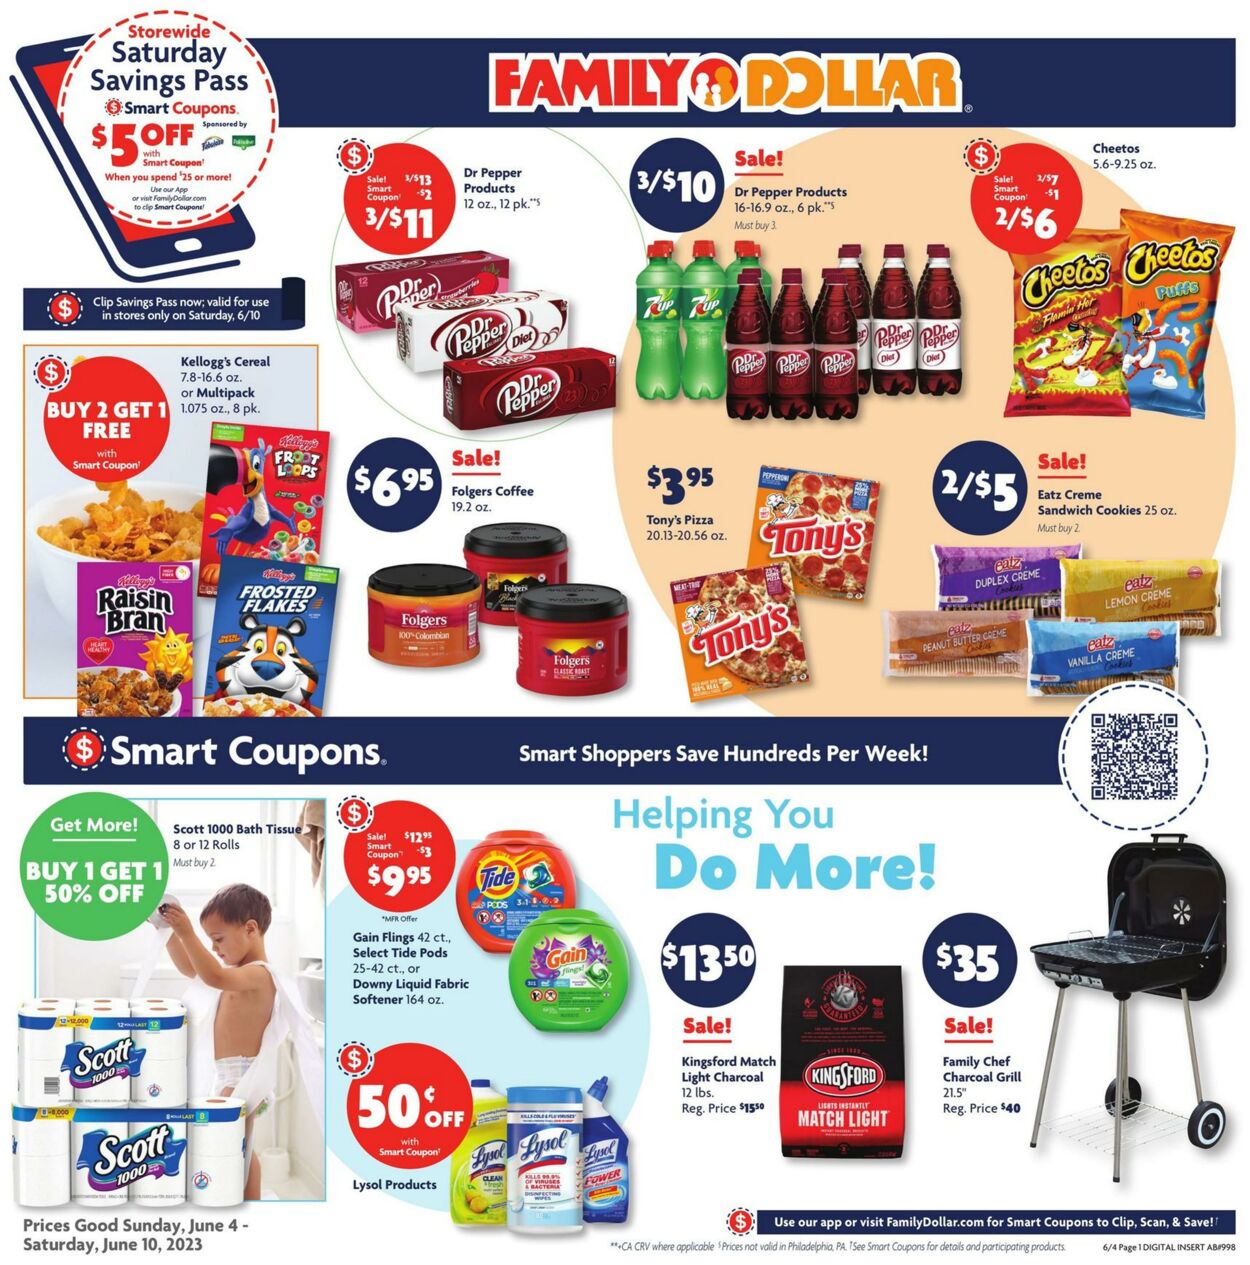 Family Dollar Promotional weekly ads